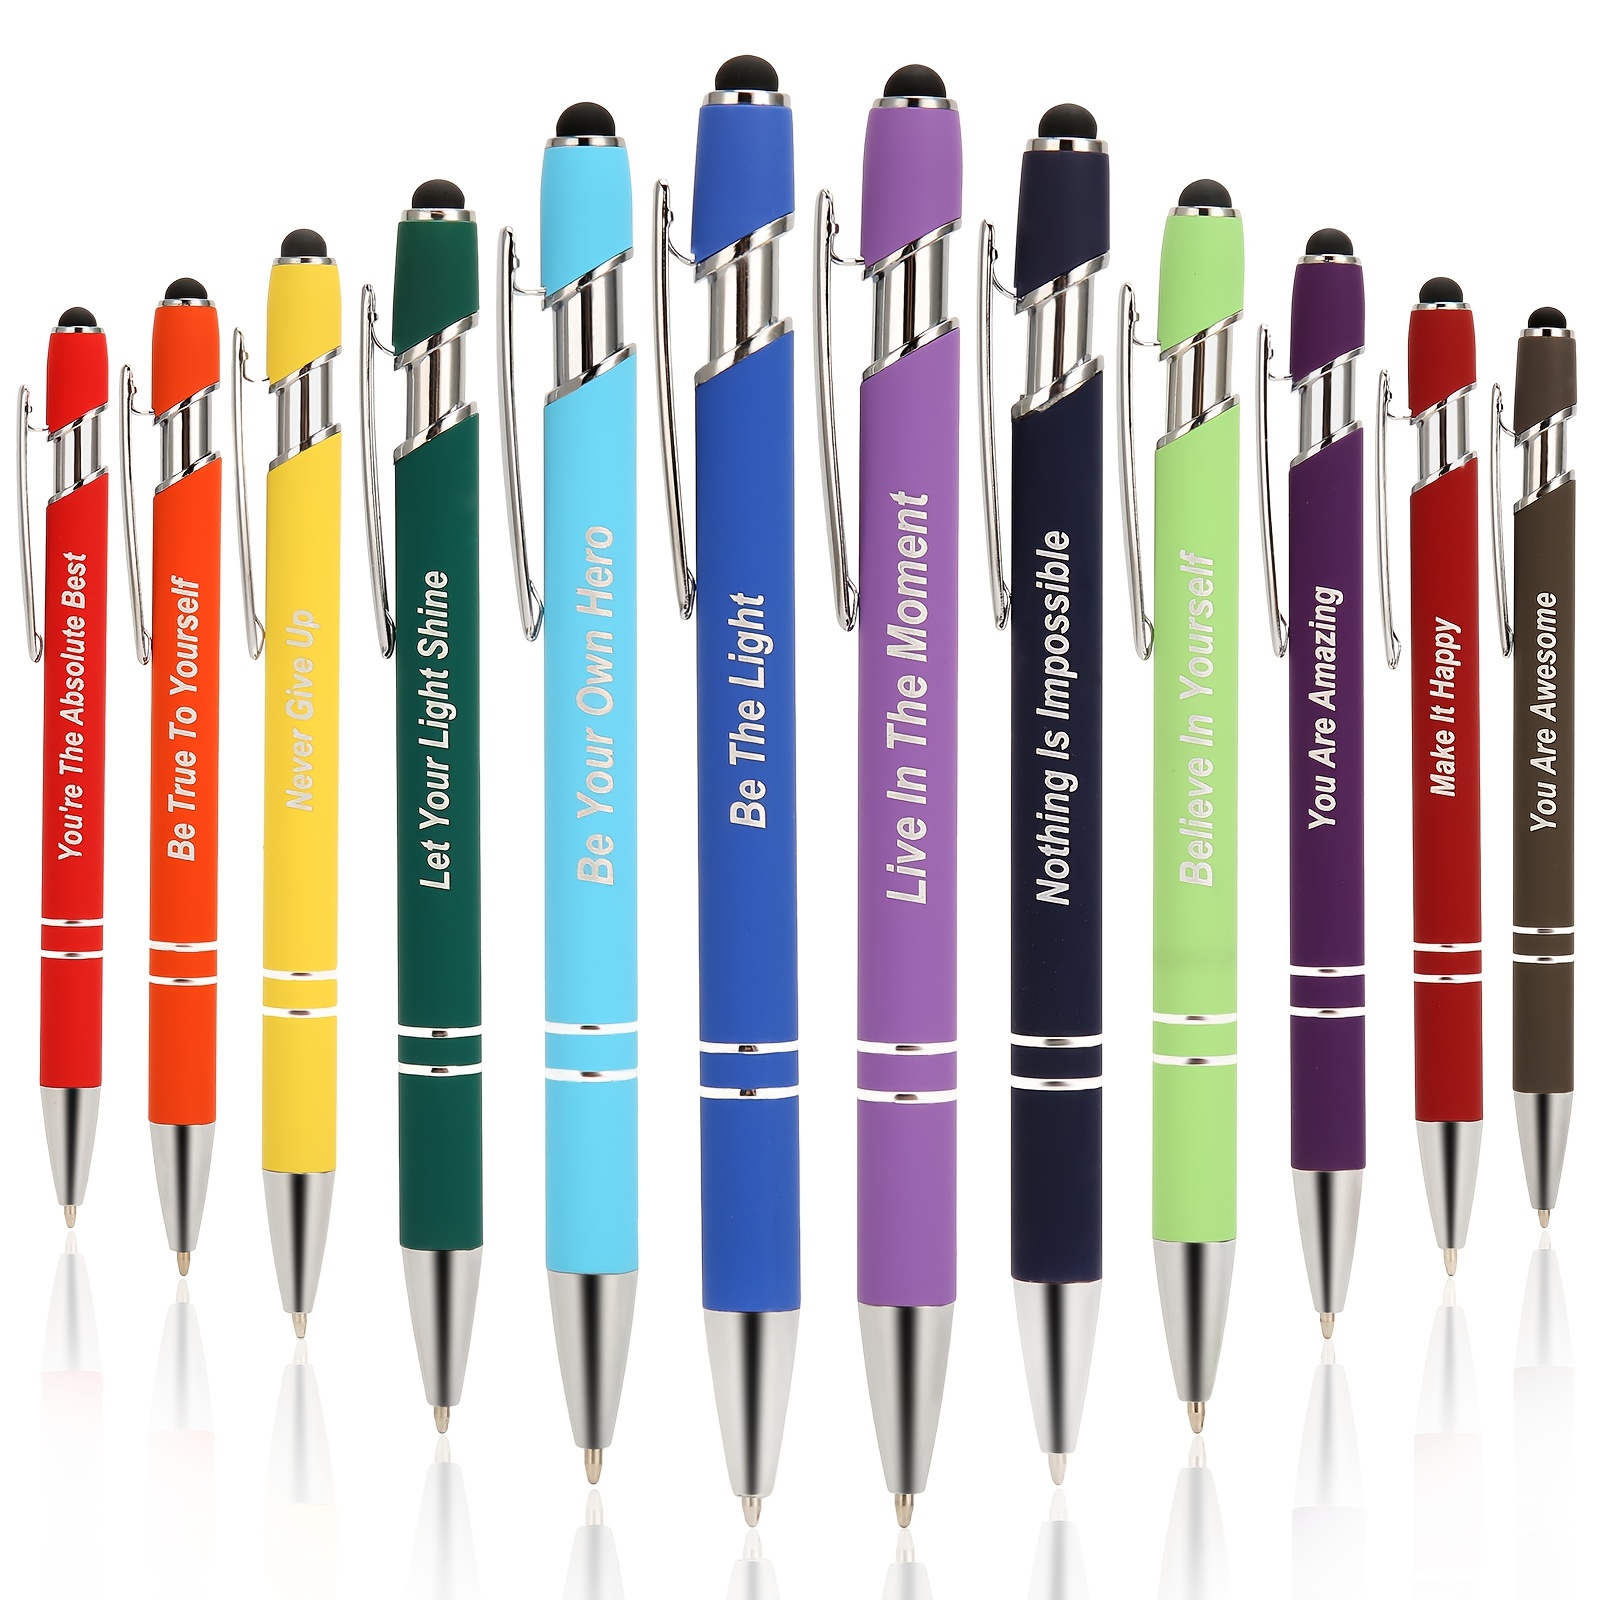 Funny Pens Novelty Pens With Screen Touch Motivational Pens Set